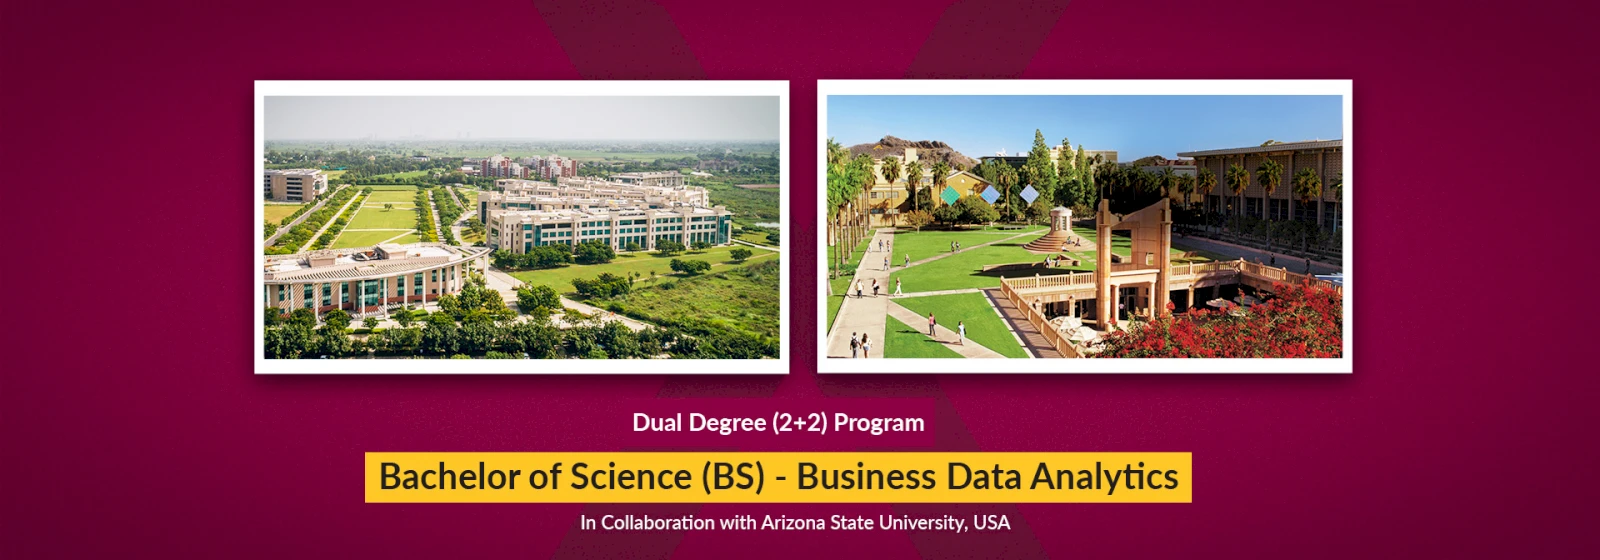 BS Business Data Analytics (Dual Degree with ASU)